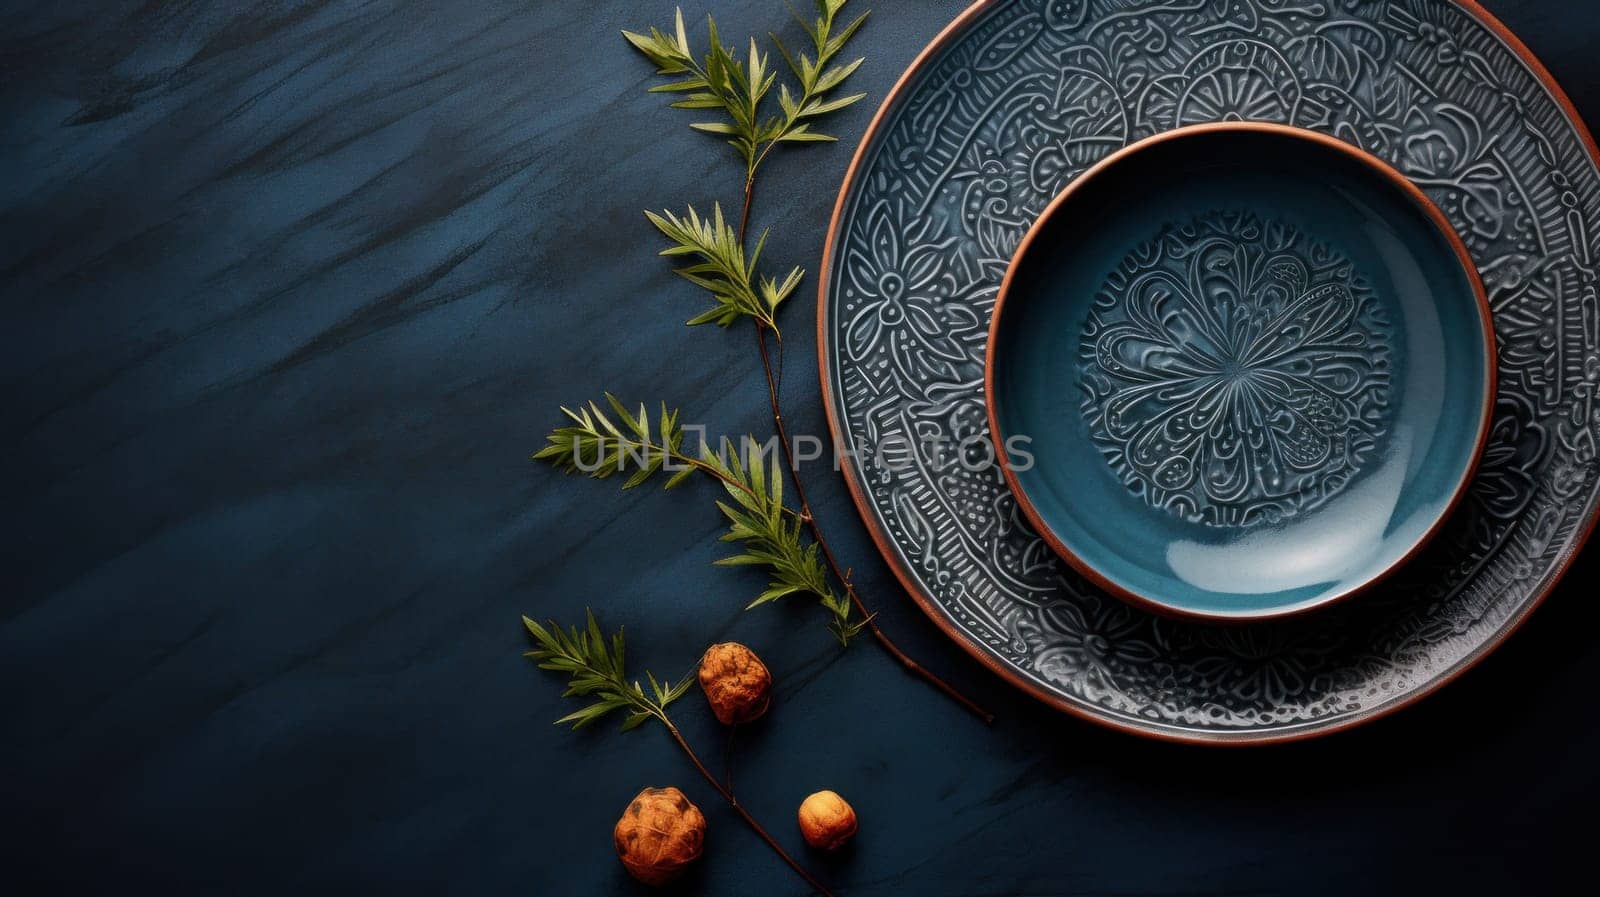 A plate with a blue rim and leaves on it next to some nuts, AI by starush